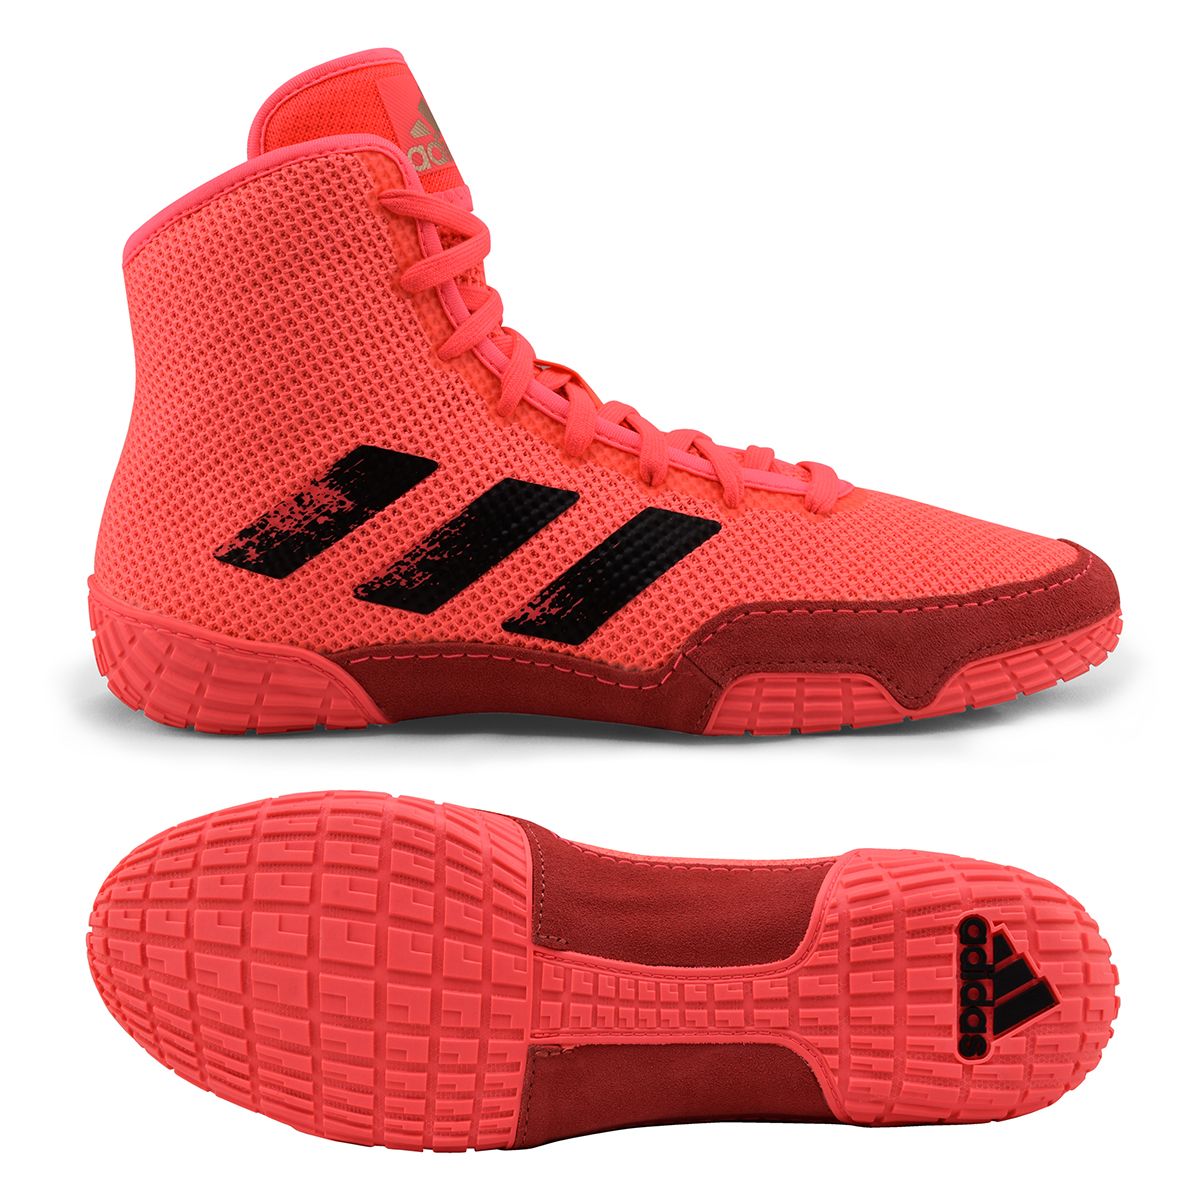 NEW - adidas Tech Fall 2.0 Wrestling Shoe, color: Pink/Black